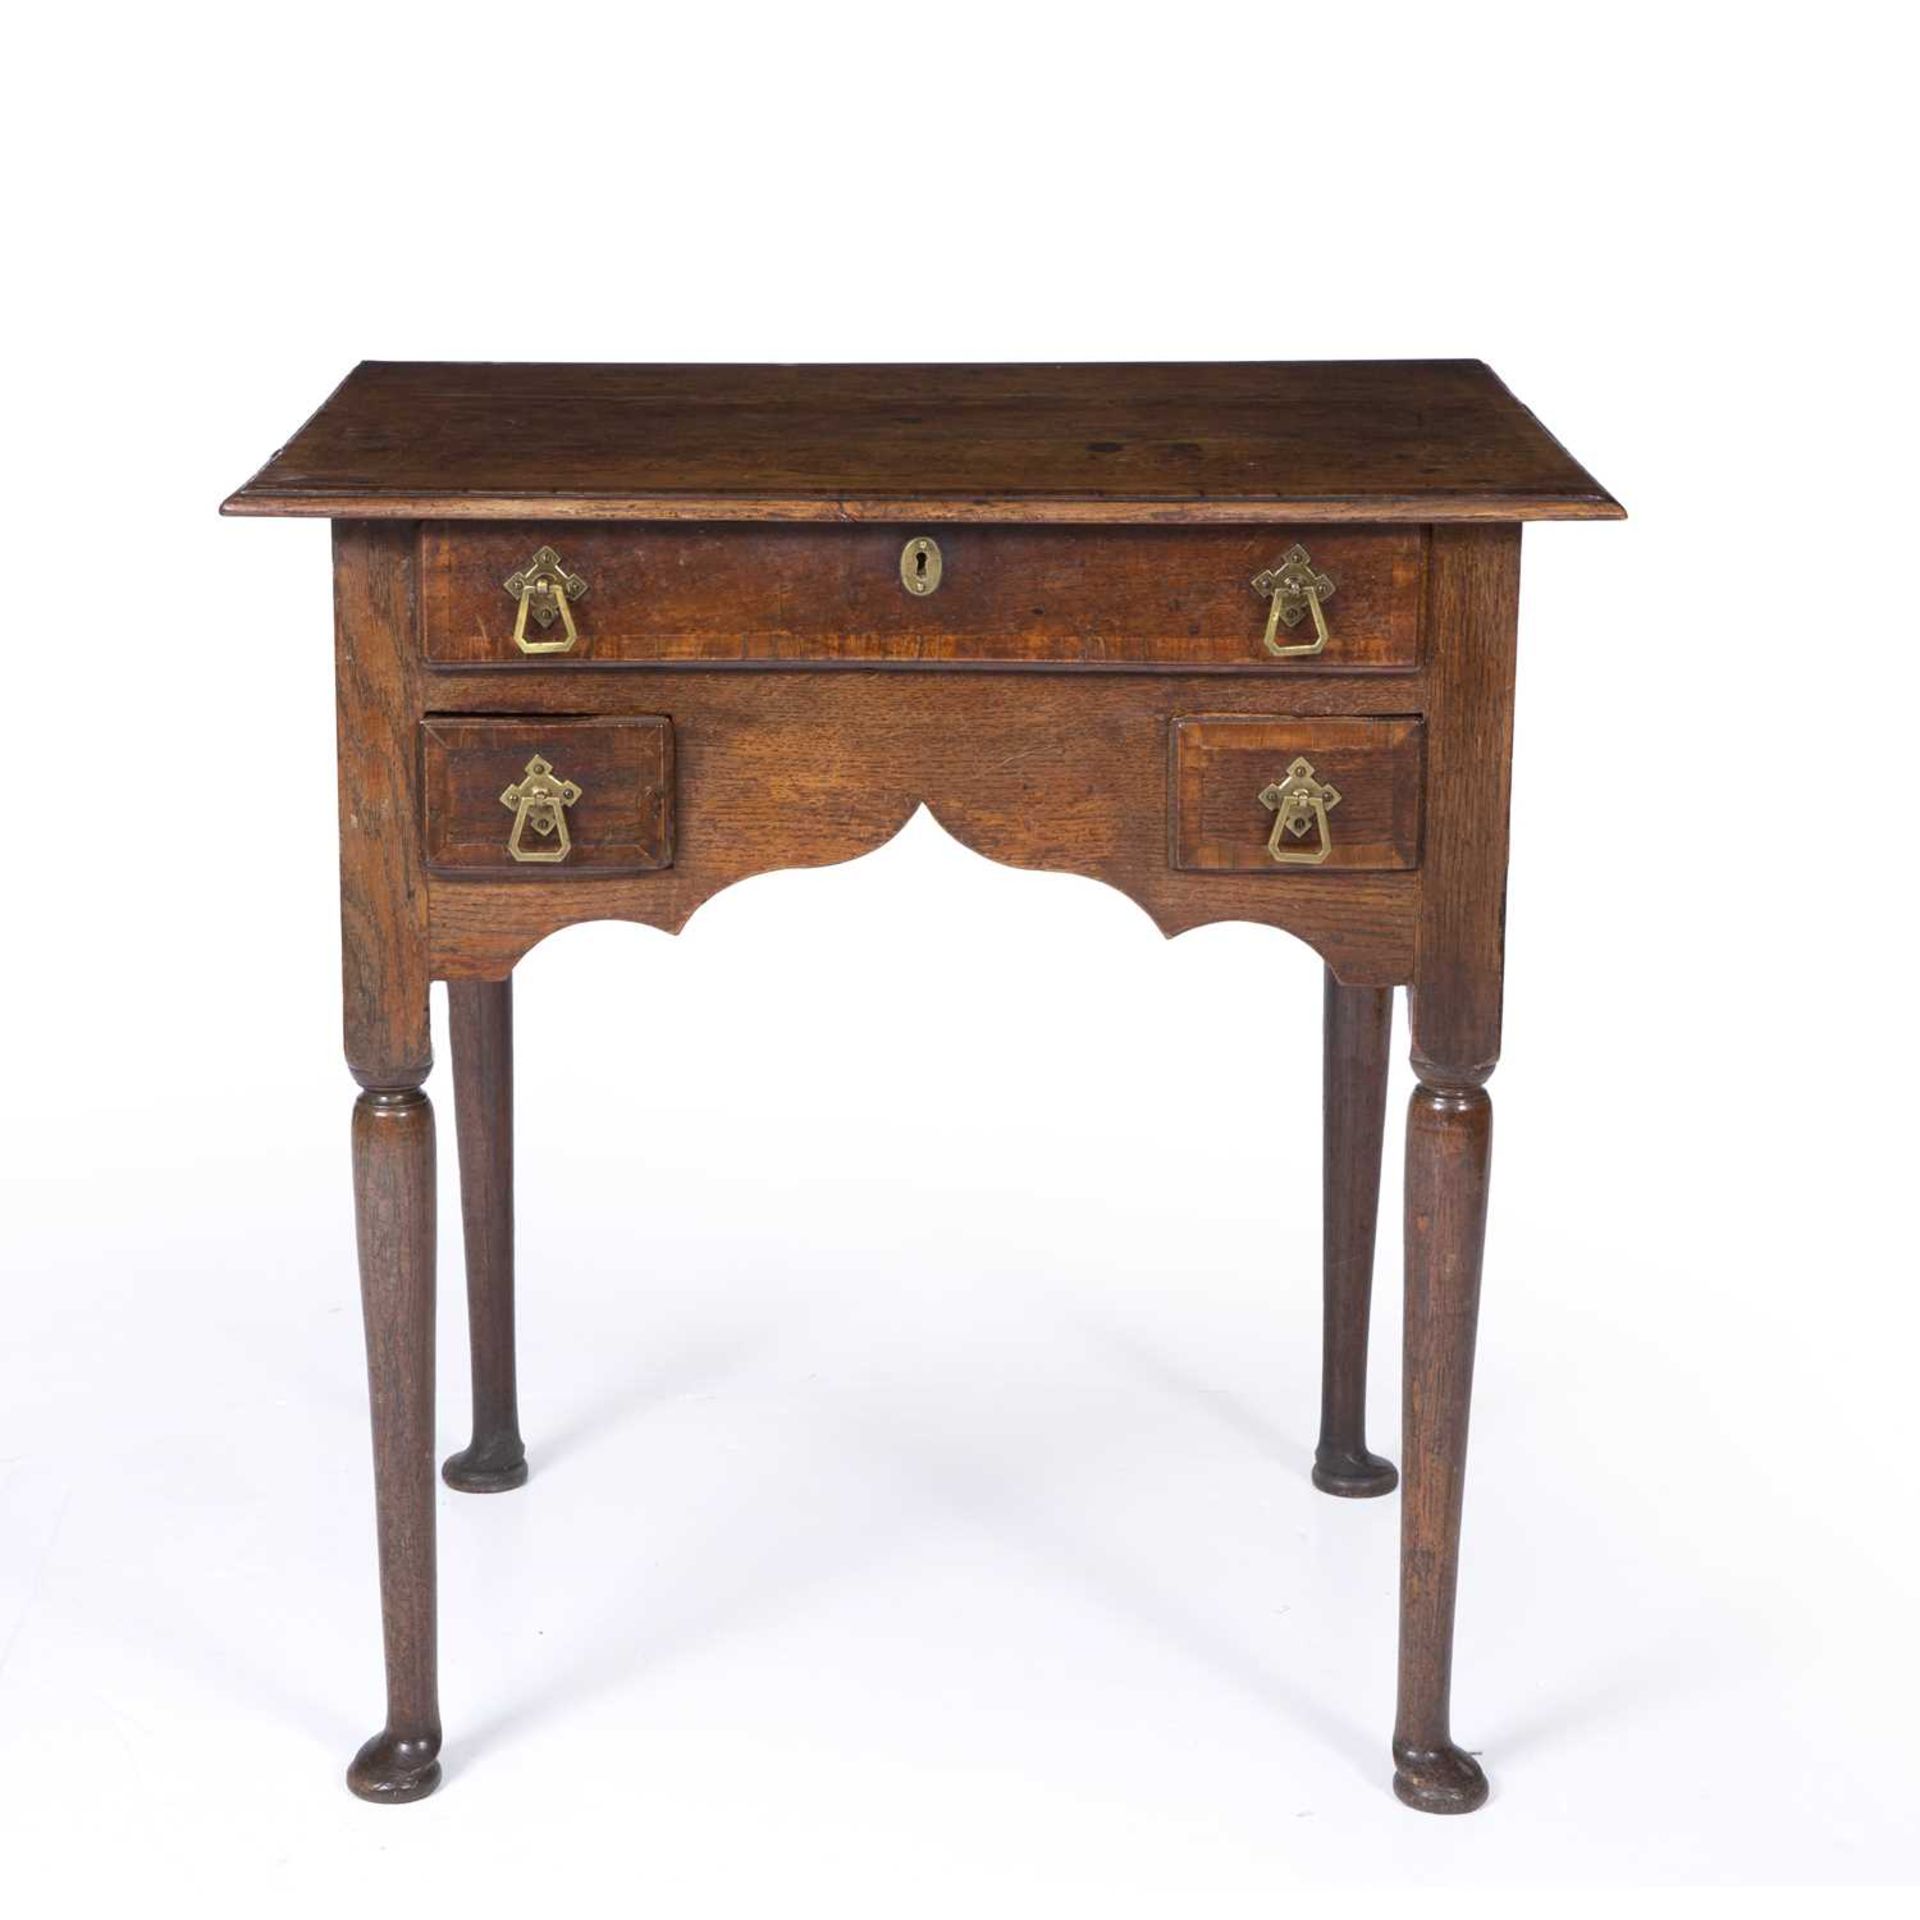 An 18th century oak low boy with three drawers and bras handles raised on turned legs and pad